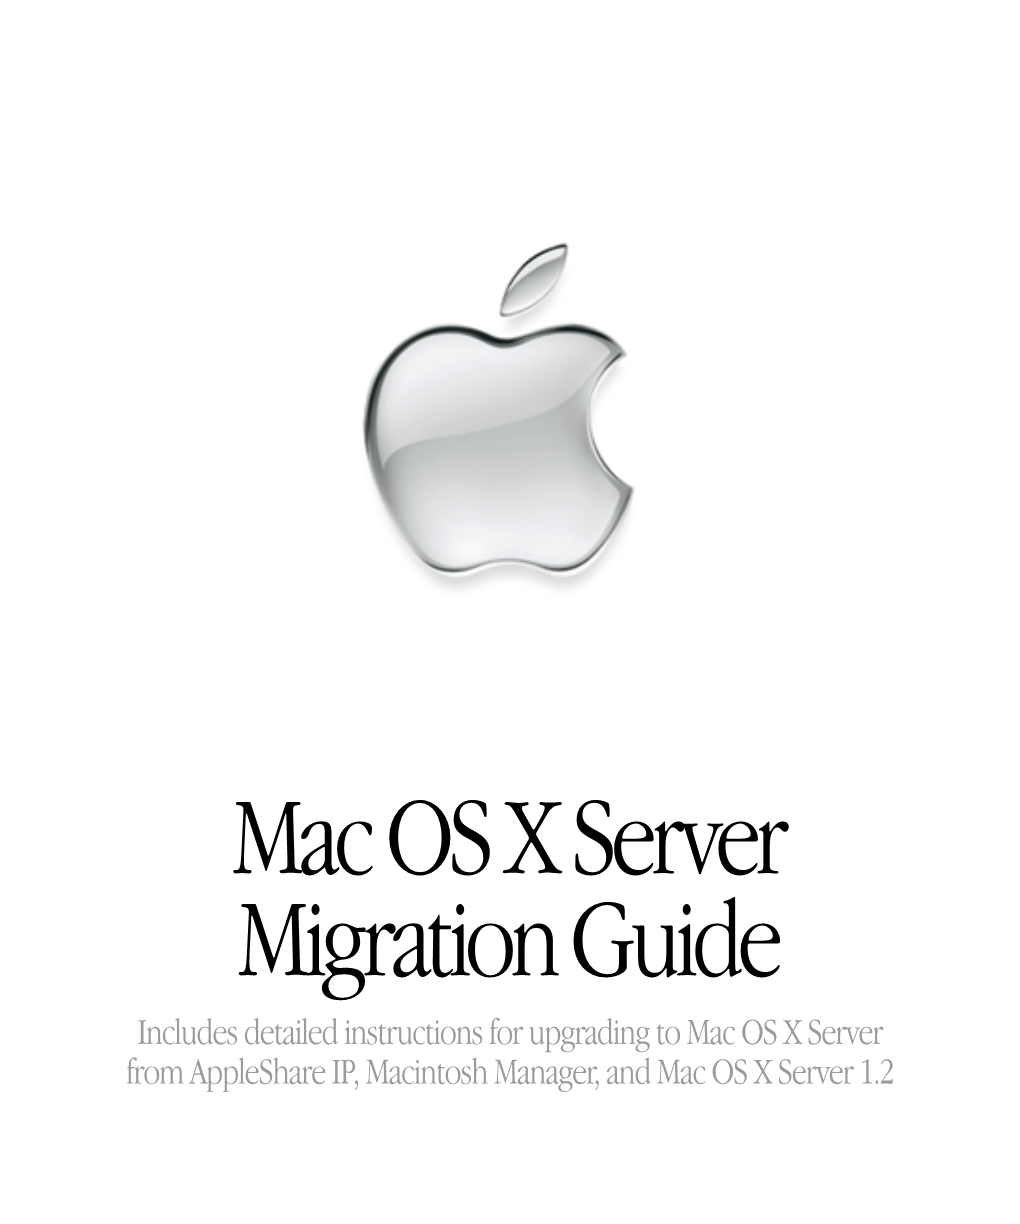 Mac OS X Server Migration Guide Includes Detailed Instructions for Upgrading to Mac OS X Server from Appleshare IP, Macintosh Manager, and Mac OS X Server 1.2